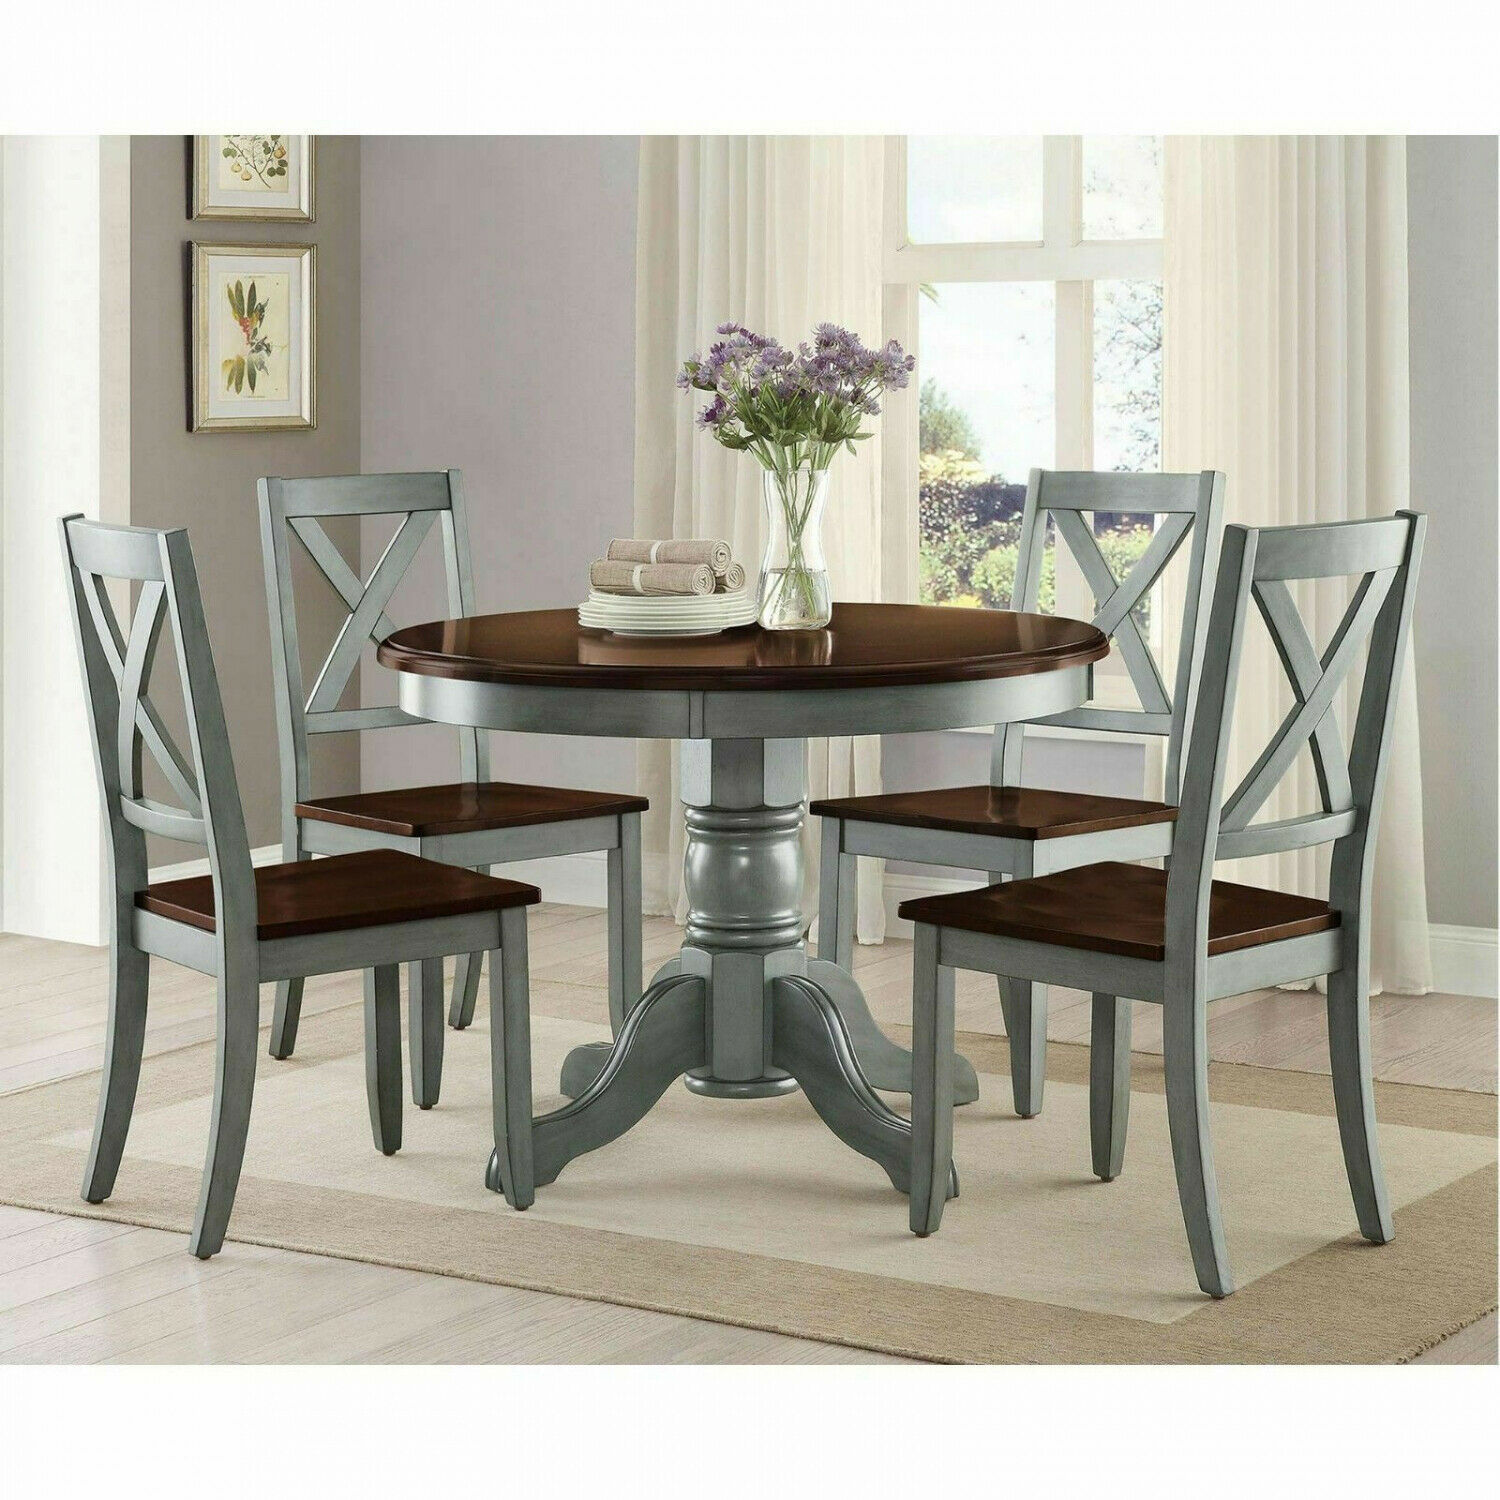 Round Dining Table Set 